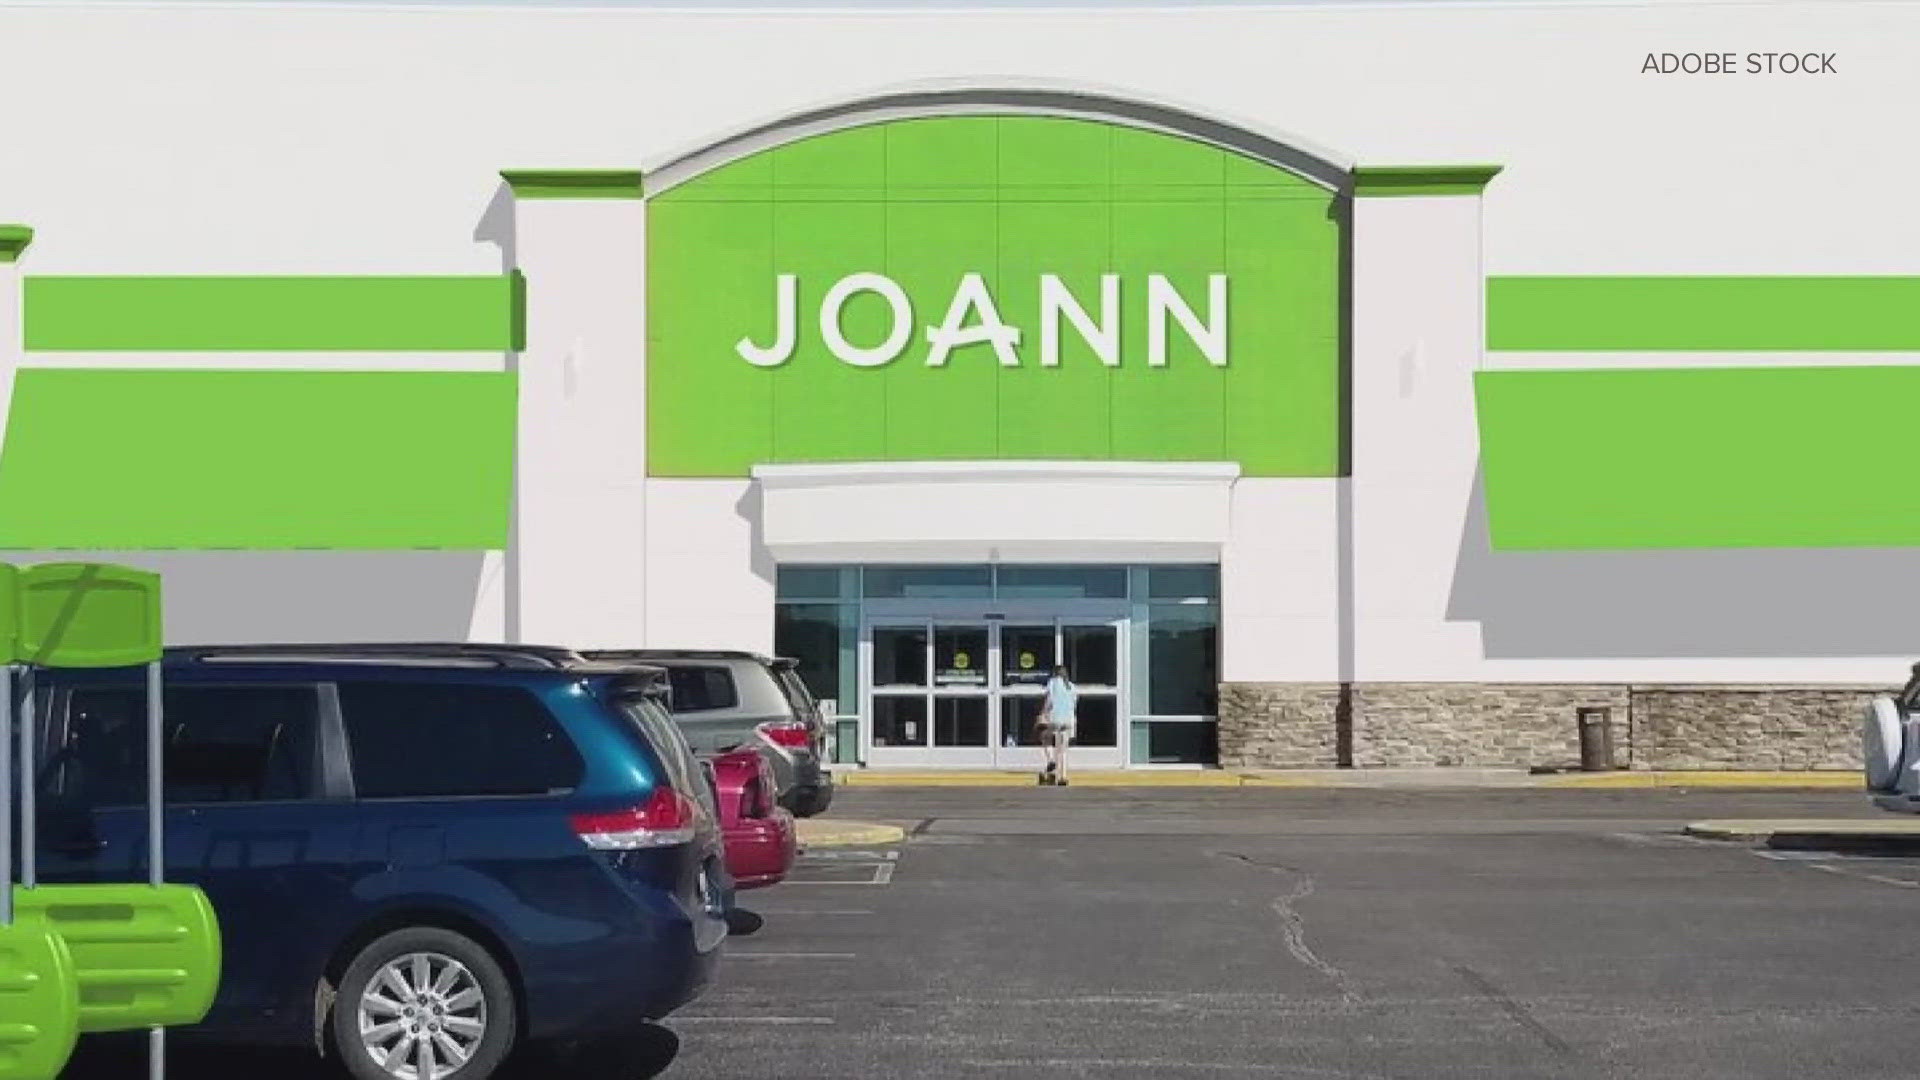 Hudson-based fabrics retail chain JOANN is expected to emerge from bankruptcy as a private company after a reorganization plan was approved by a Delaware court.